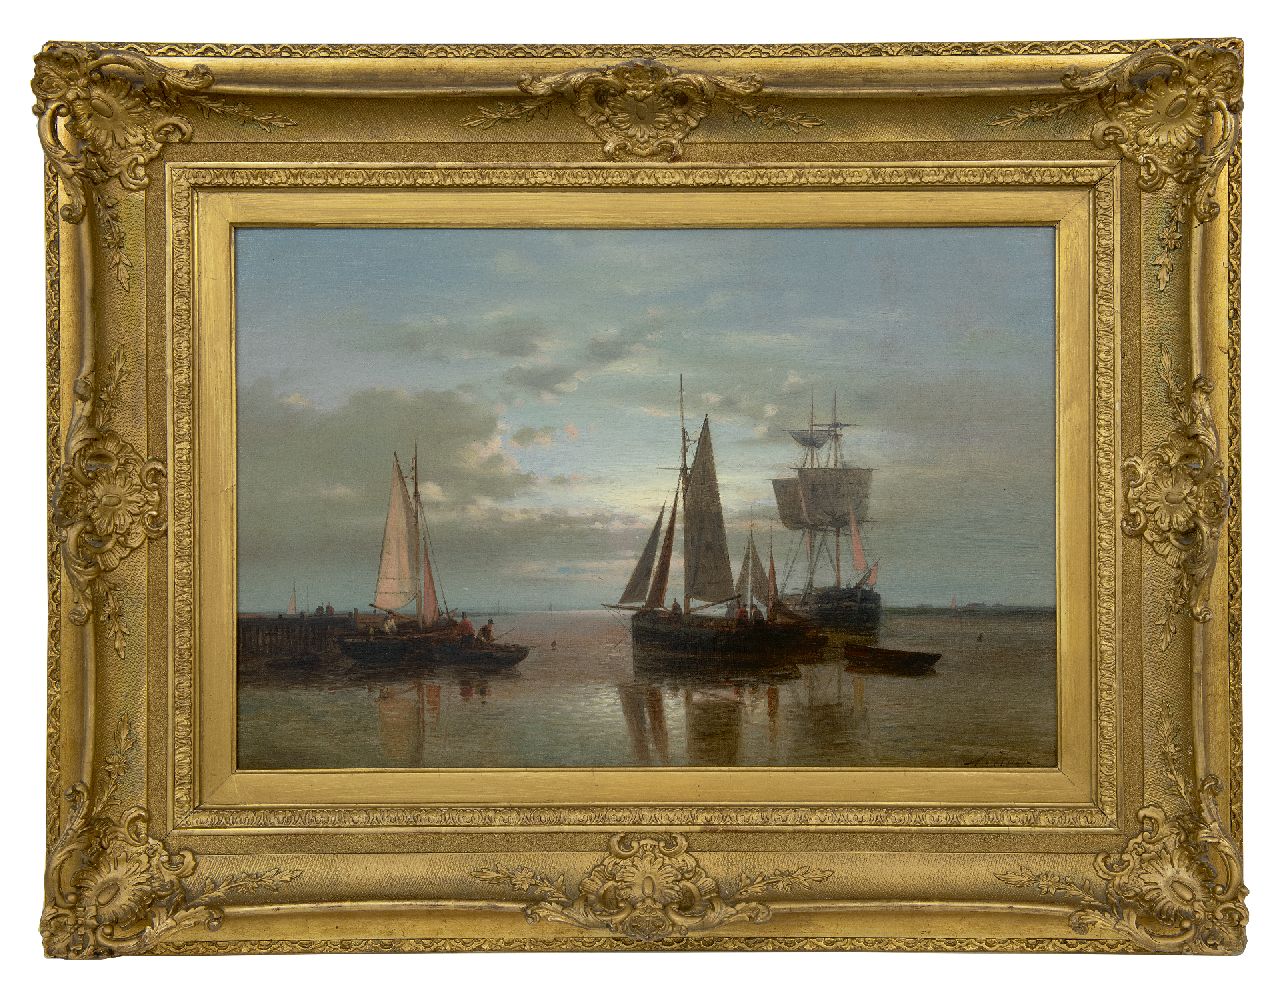 Hulk A.  | Abraham Hulk | Paintings offered for sale | Sailing ships anchored at sunset, oil on canvas 40.5 x 60.8 cm, signed l.r.